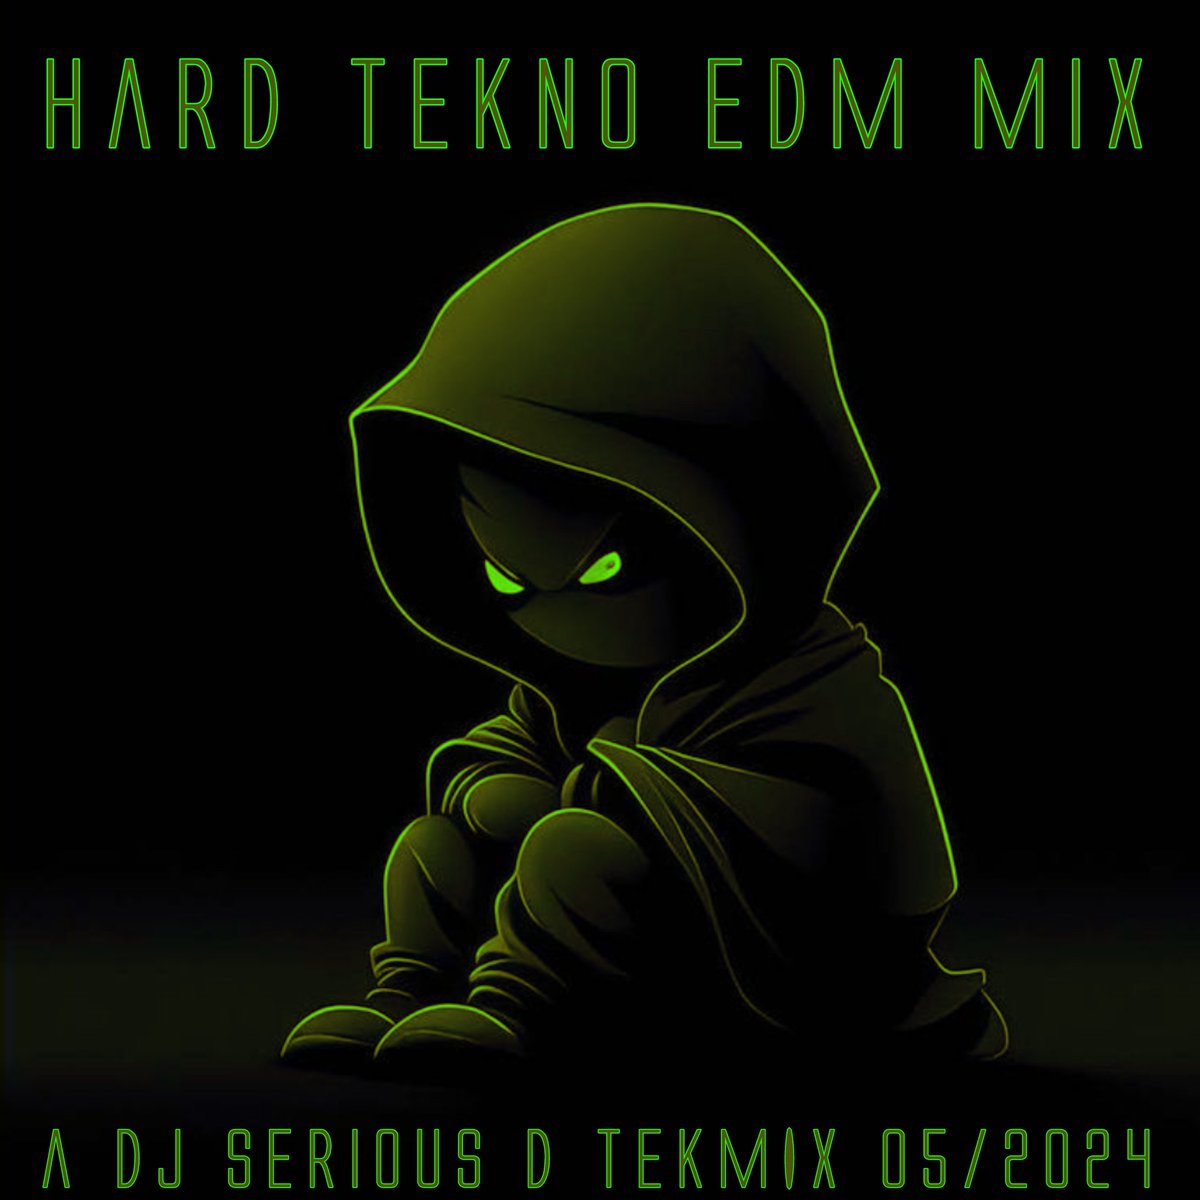 👽it's gotta be done for all the Technoheads out there and beyond! 🌏✨🛸 This is a #hardtechno mix! 👇👽
#djseriousd #djmixes
#techno #EDM #freetekno
#industrial #technofanart
#electronicmusic #tekno
#NowPlaying #music #dj
#TEKNOFEST #Festivals
#ようこそ #日本人 #テクノ #音楽